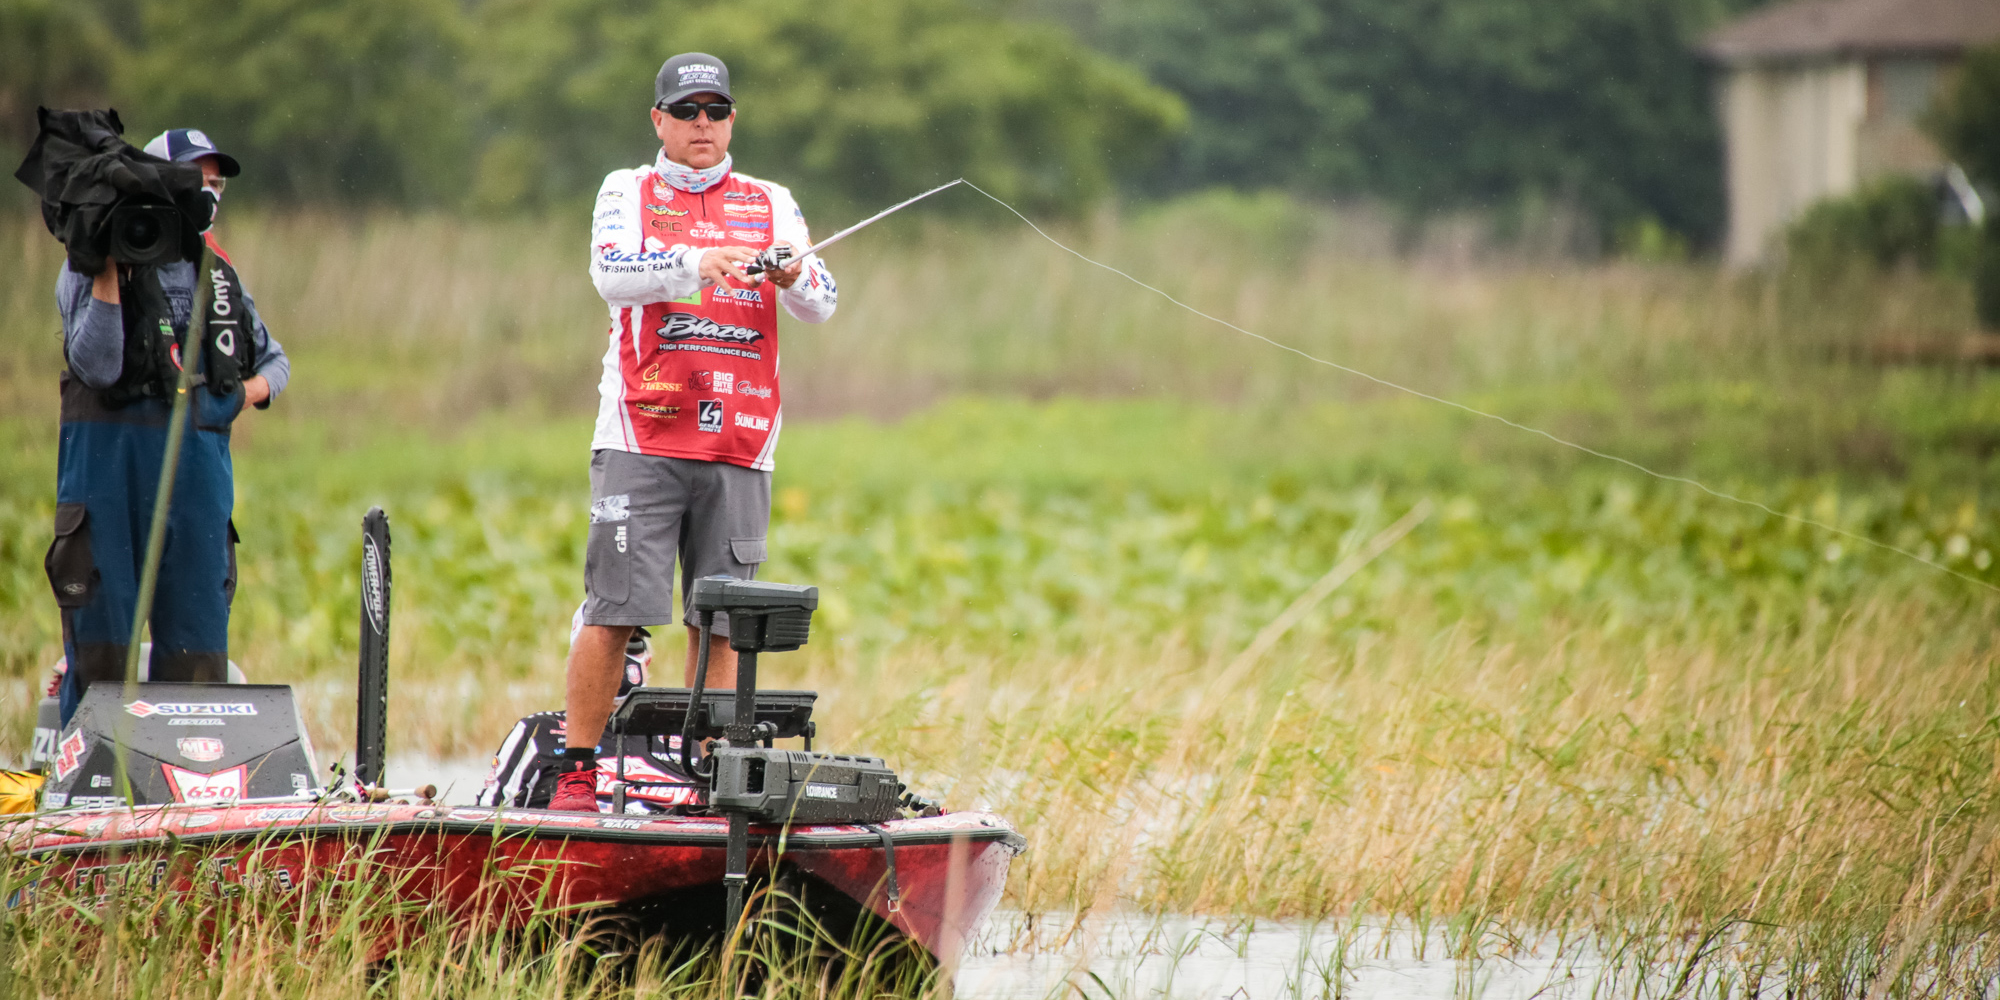 Learn Dean Rojas' Favorite Place to Fish a Frog - Major League Fishing